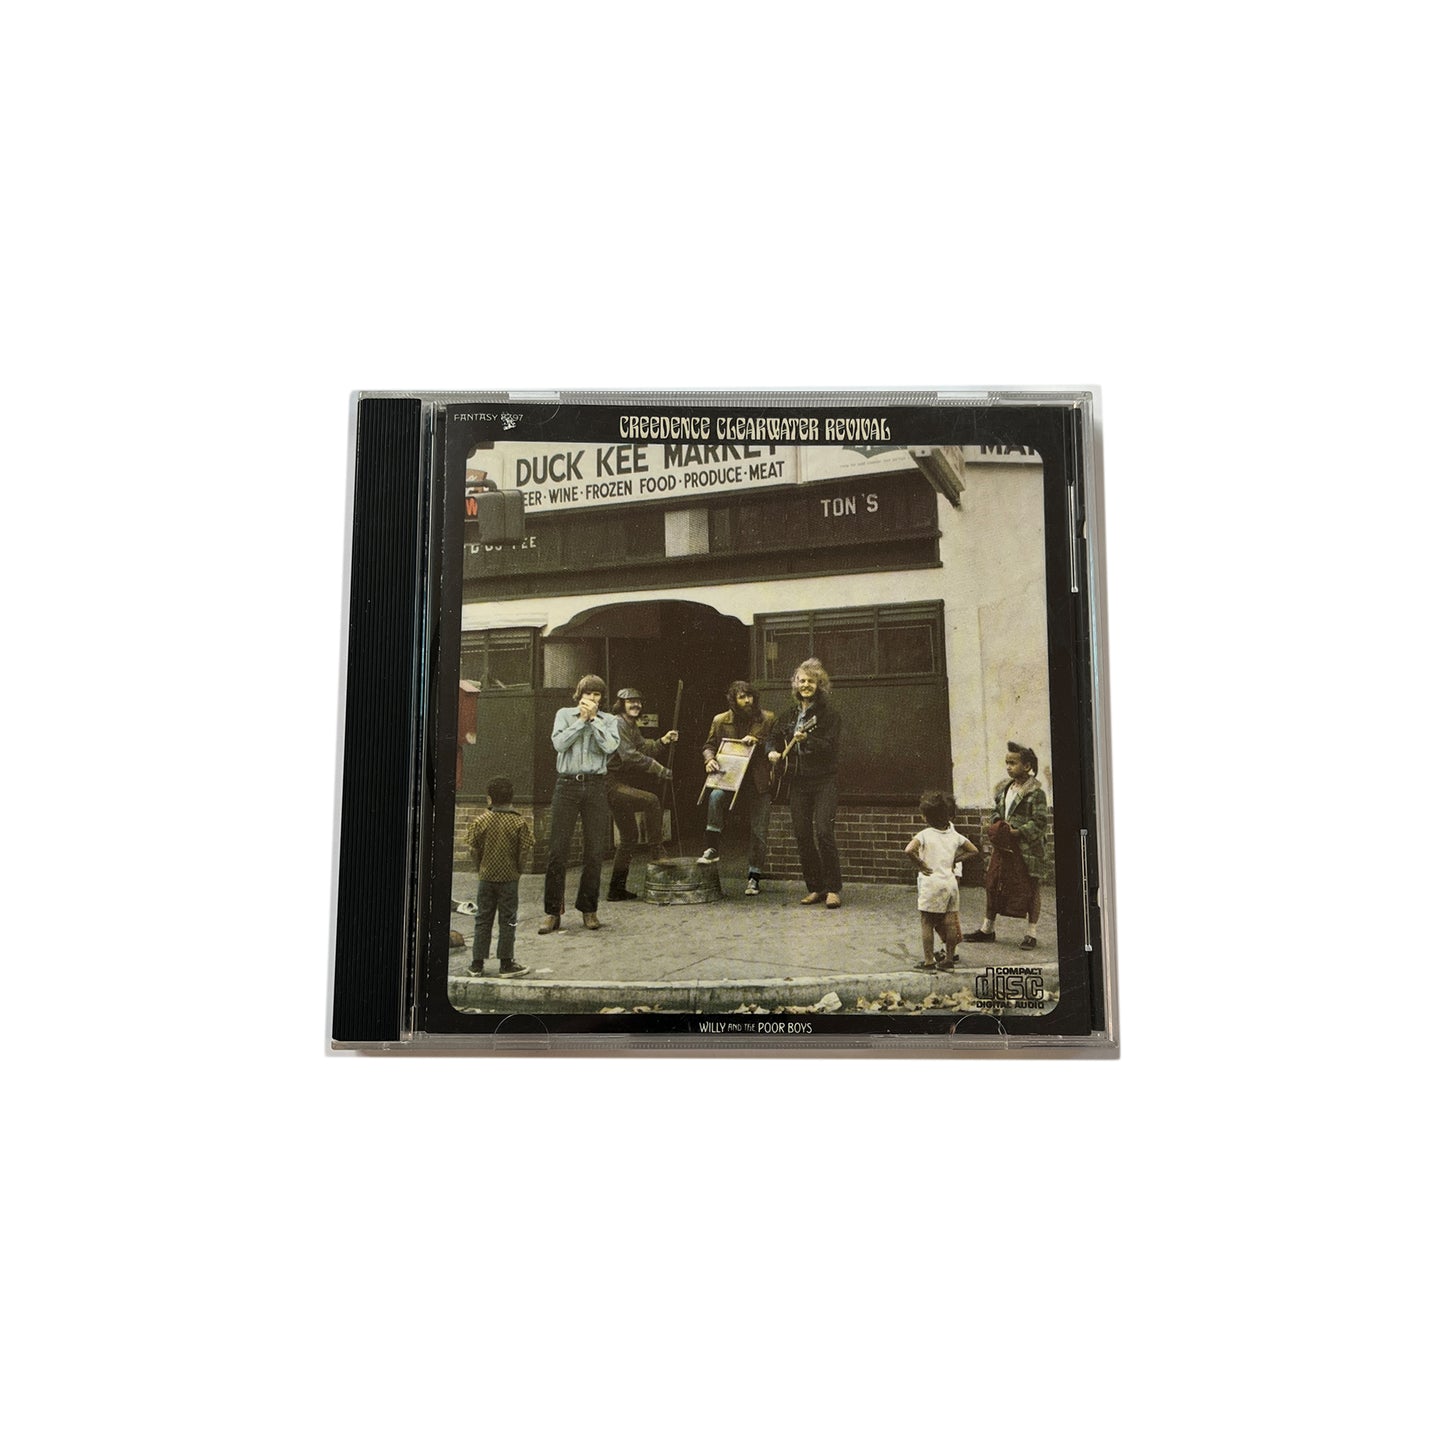 Vintage Creedence Clearwater Revival CD CCR Willy And The Poor Boys